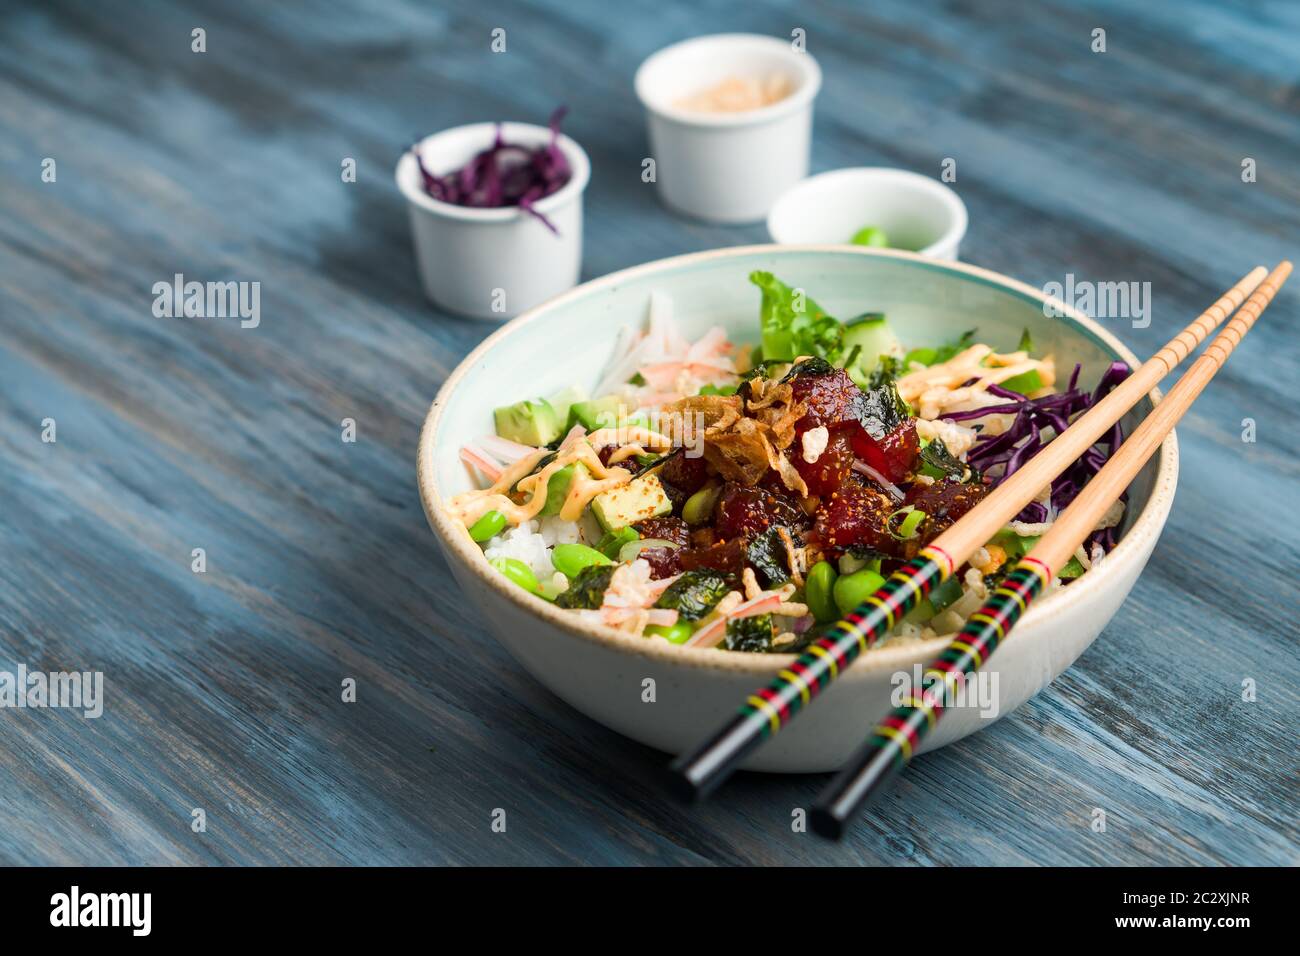 Poke bowl with chopsticks and ingredients. Poke is a traditional Hawaiian dish influenced by japanese and asian cuisine. Ahi poke is made of raw tuna Stock Photo